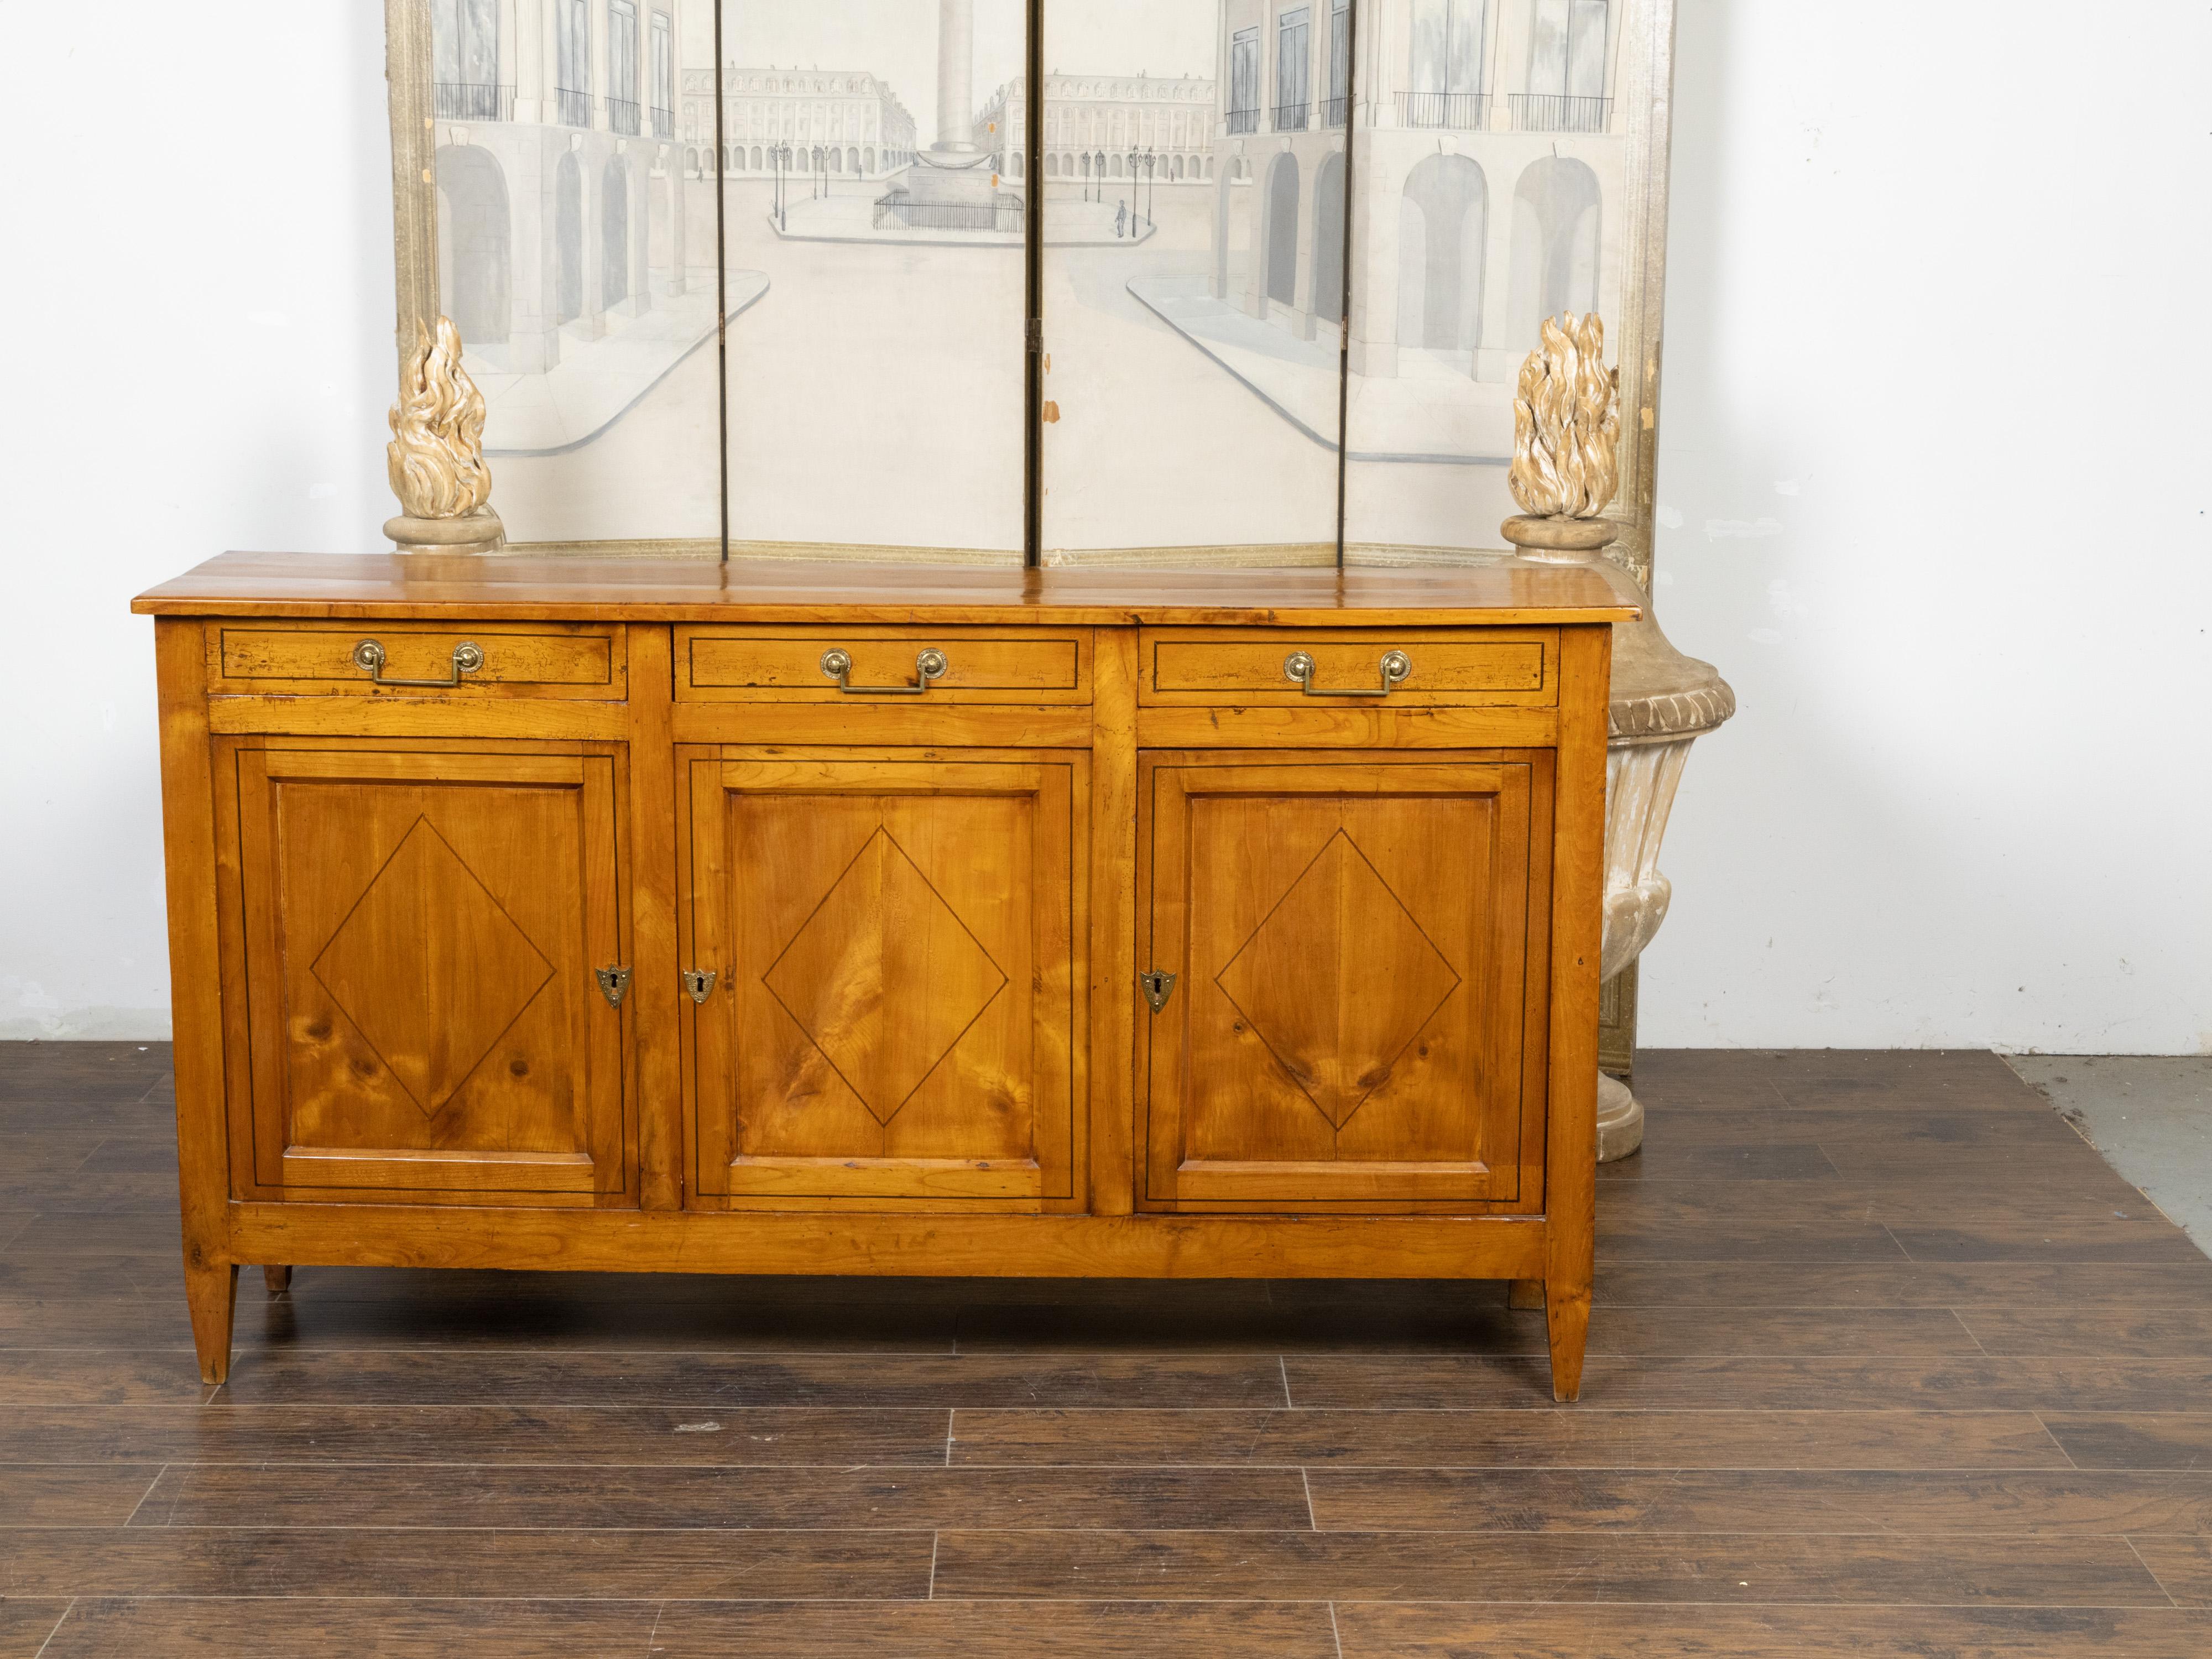 A French Directoire style walnut enfilade from the 19th century, with three drawers over three doors, cross-banded diamond motifs and tapered feet. Created in France during the 19th century, this Directoire style walnut enfilade features a